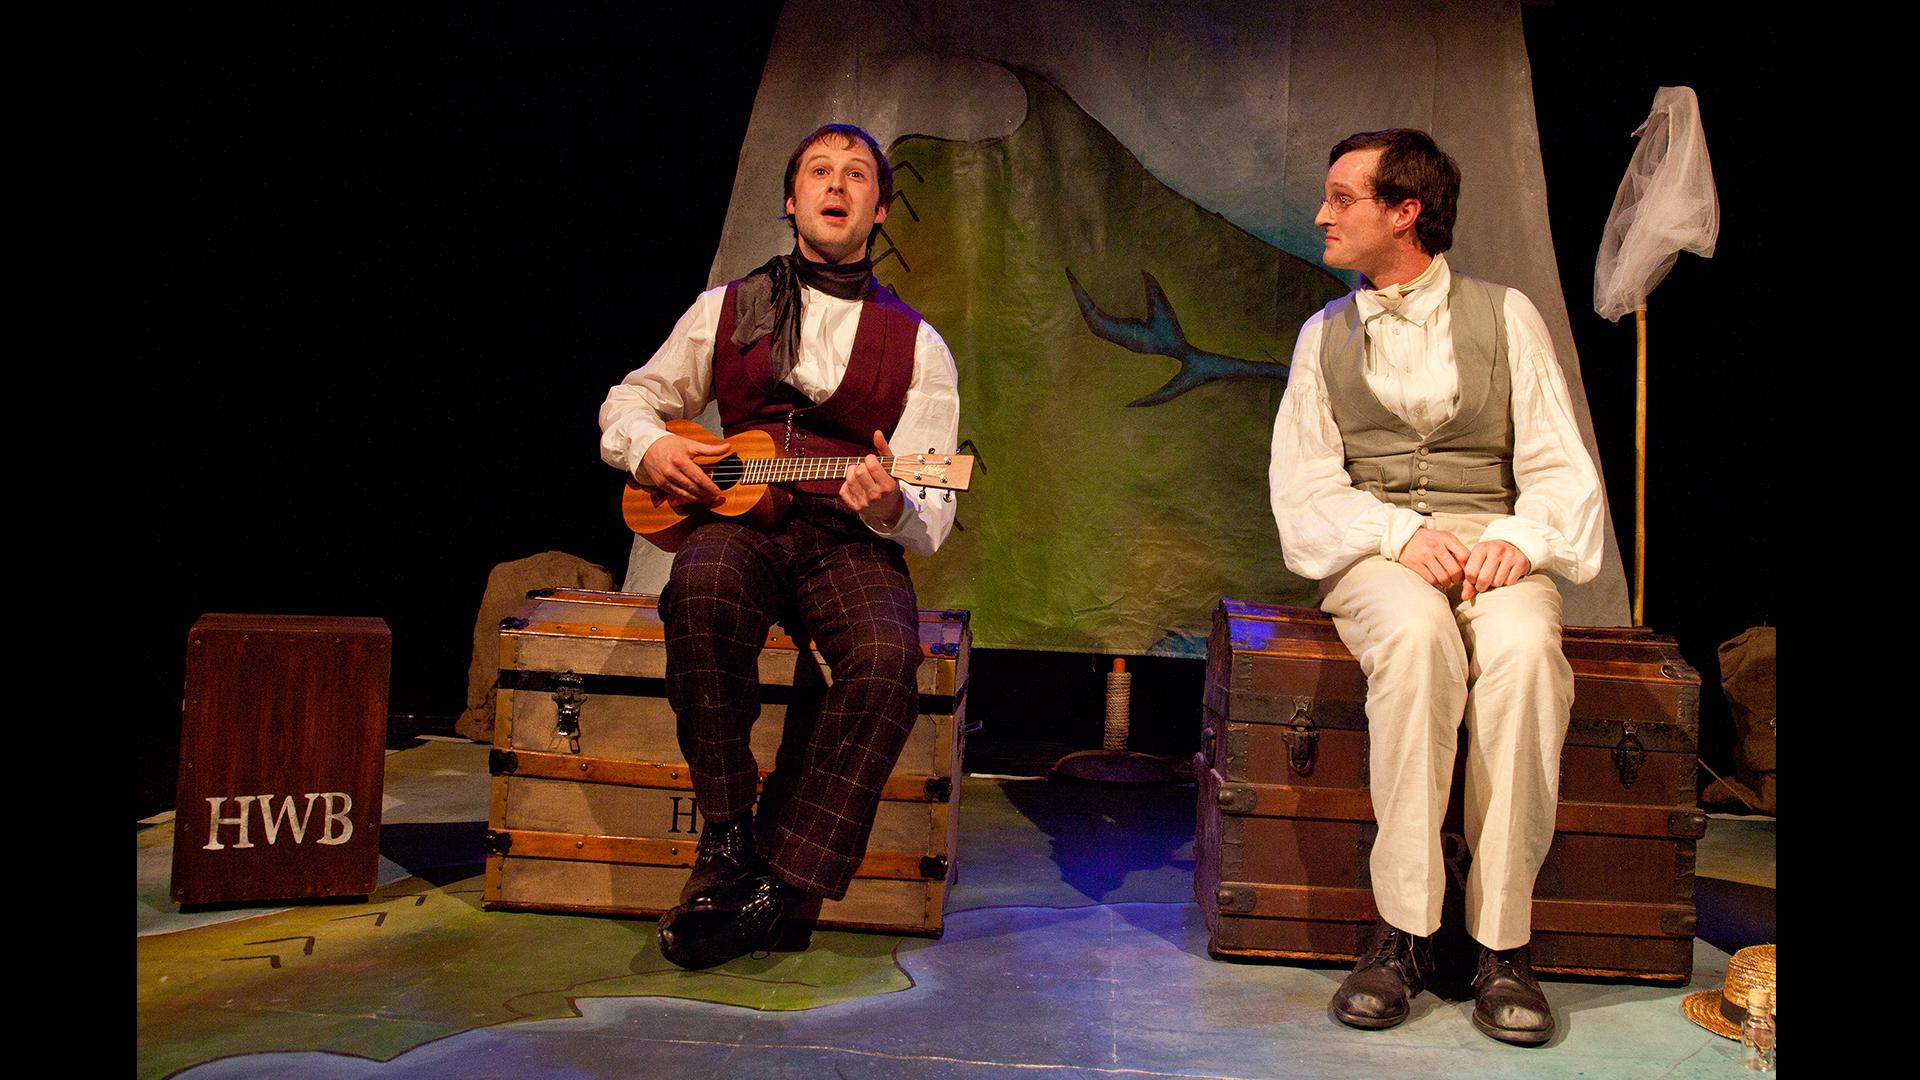 Two actors dressed as Victoria explorers Wallace and Bates, sat on travelling trunks. One is playing a small guitar.